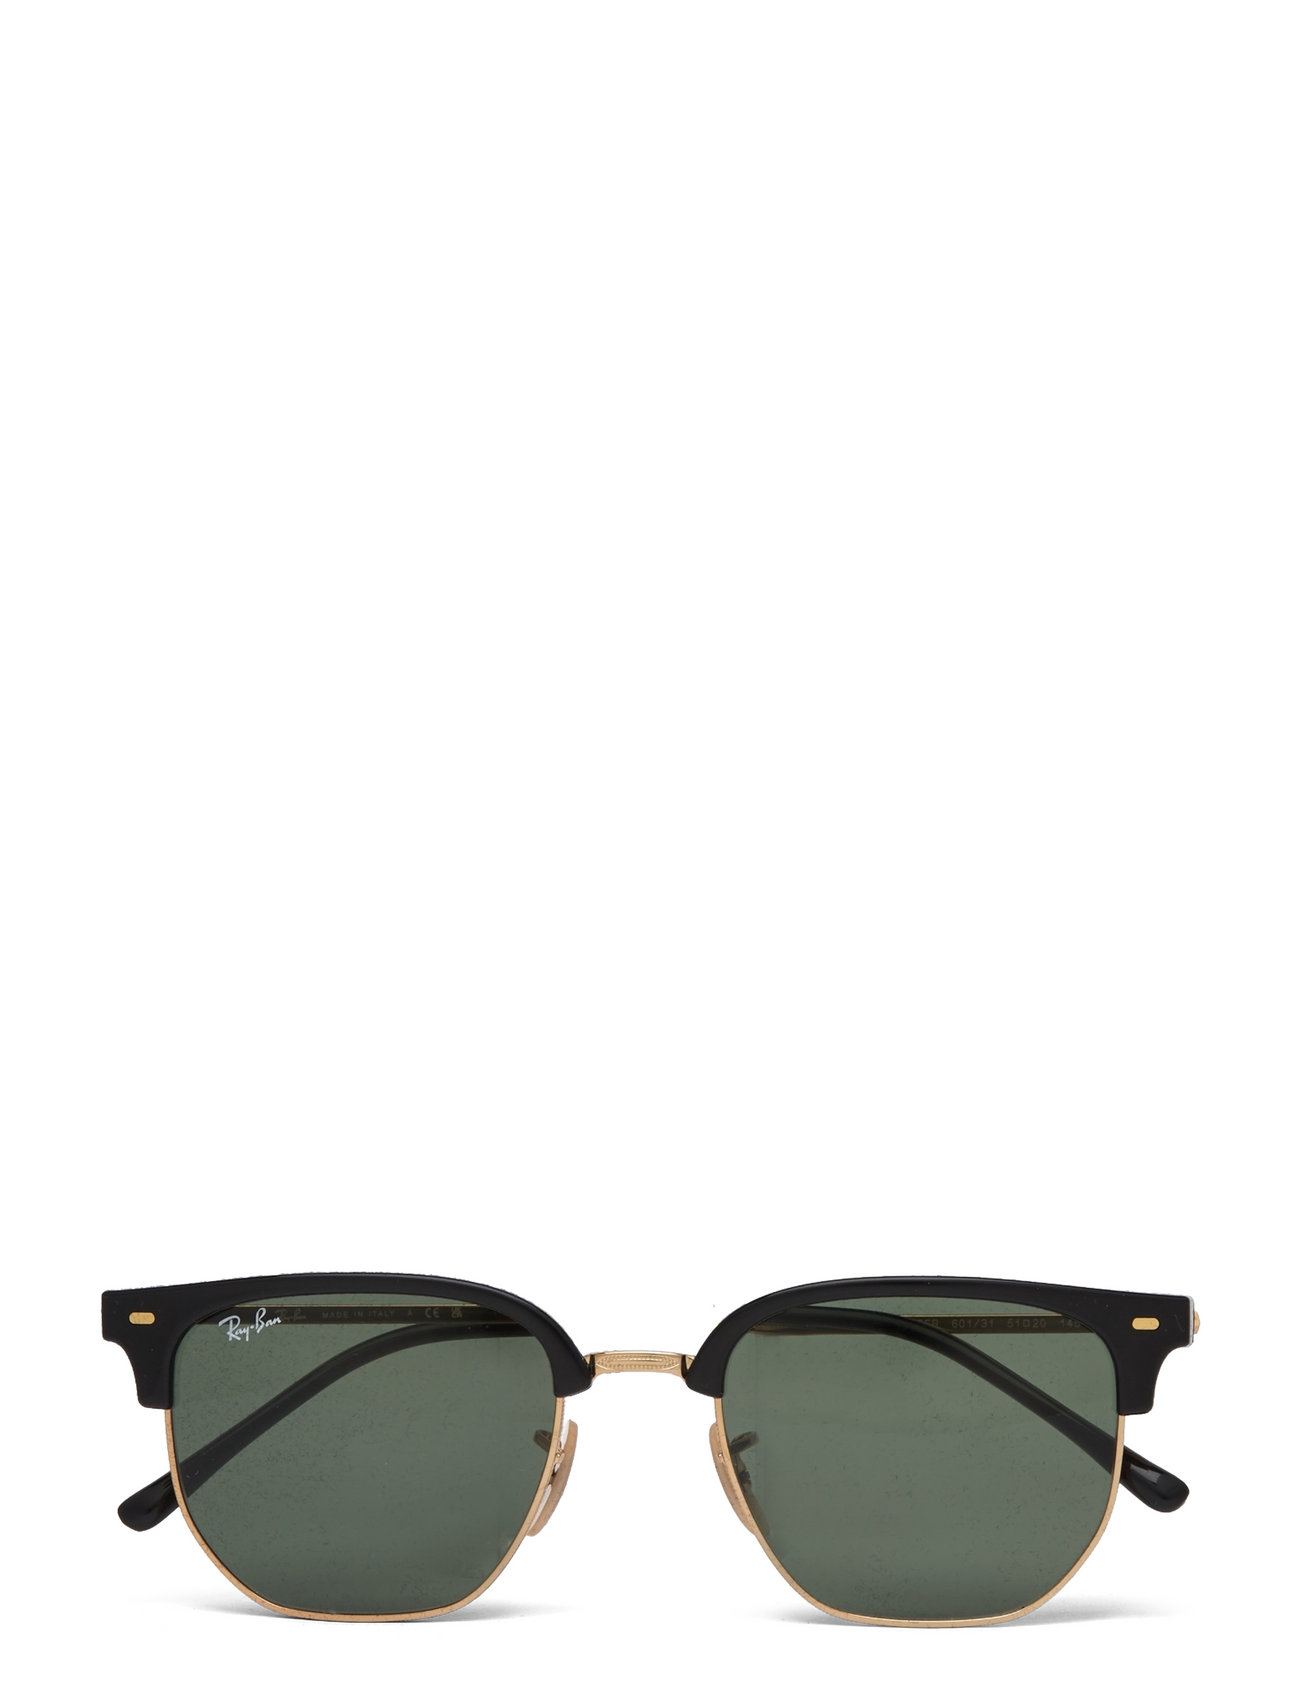 Ray-Ban "New Clubmaster Designers Sunglasses D-frame- Wayfarer Multi/patterned Ray-Ban"